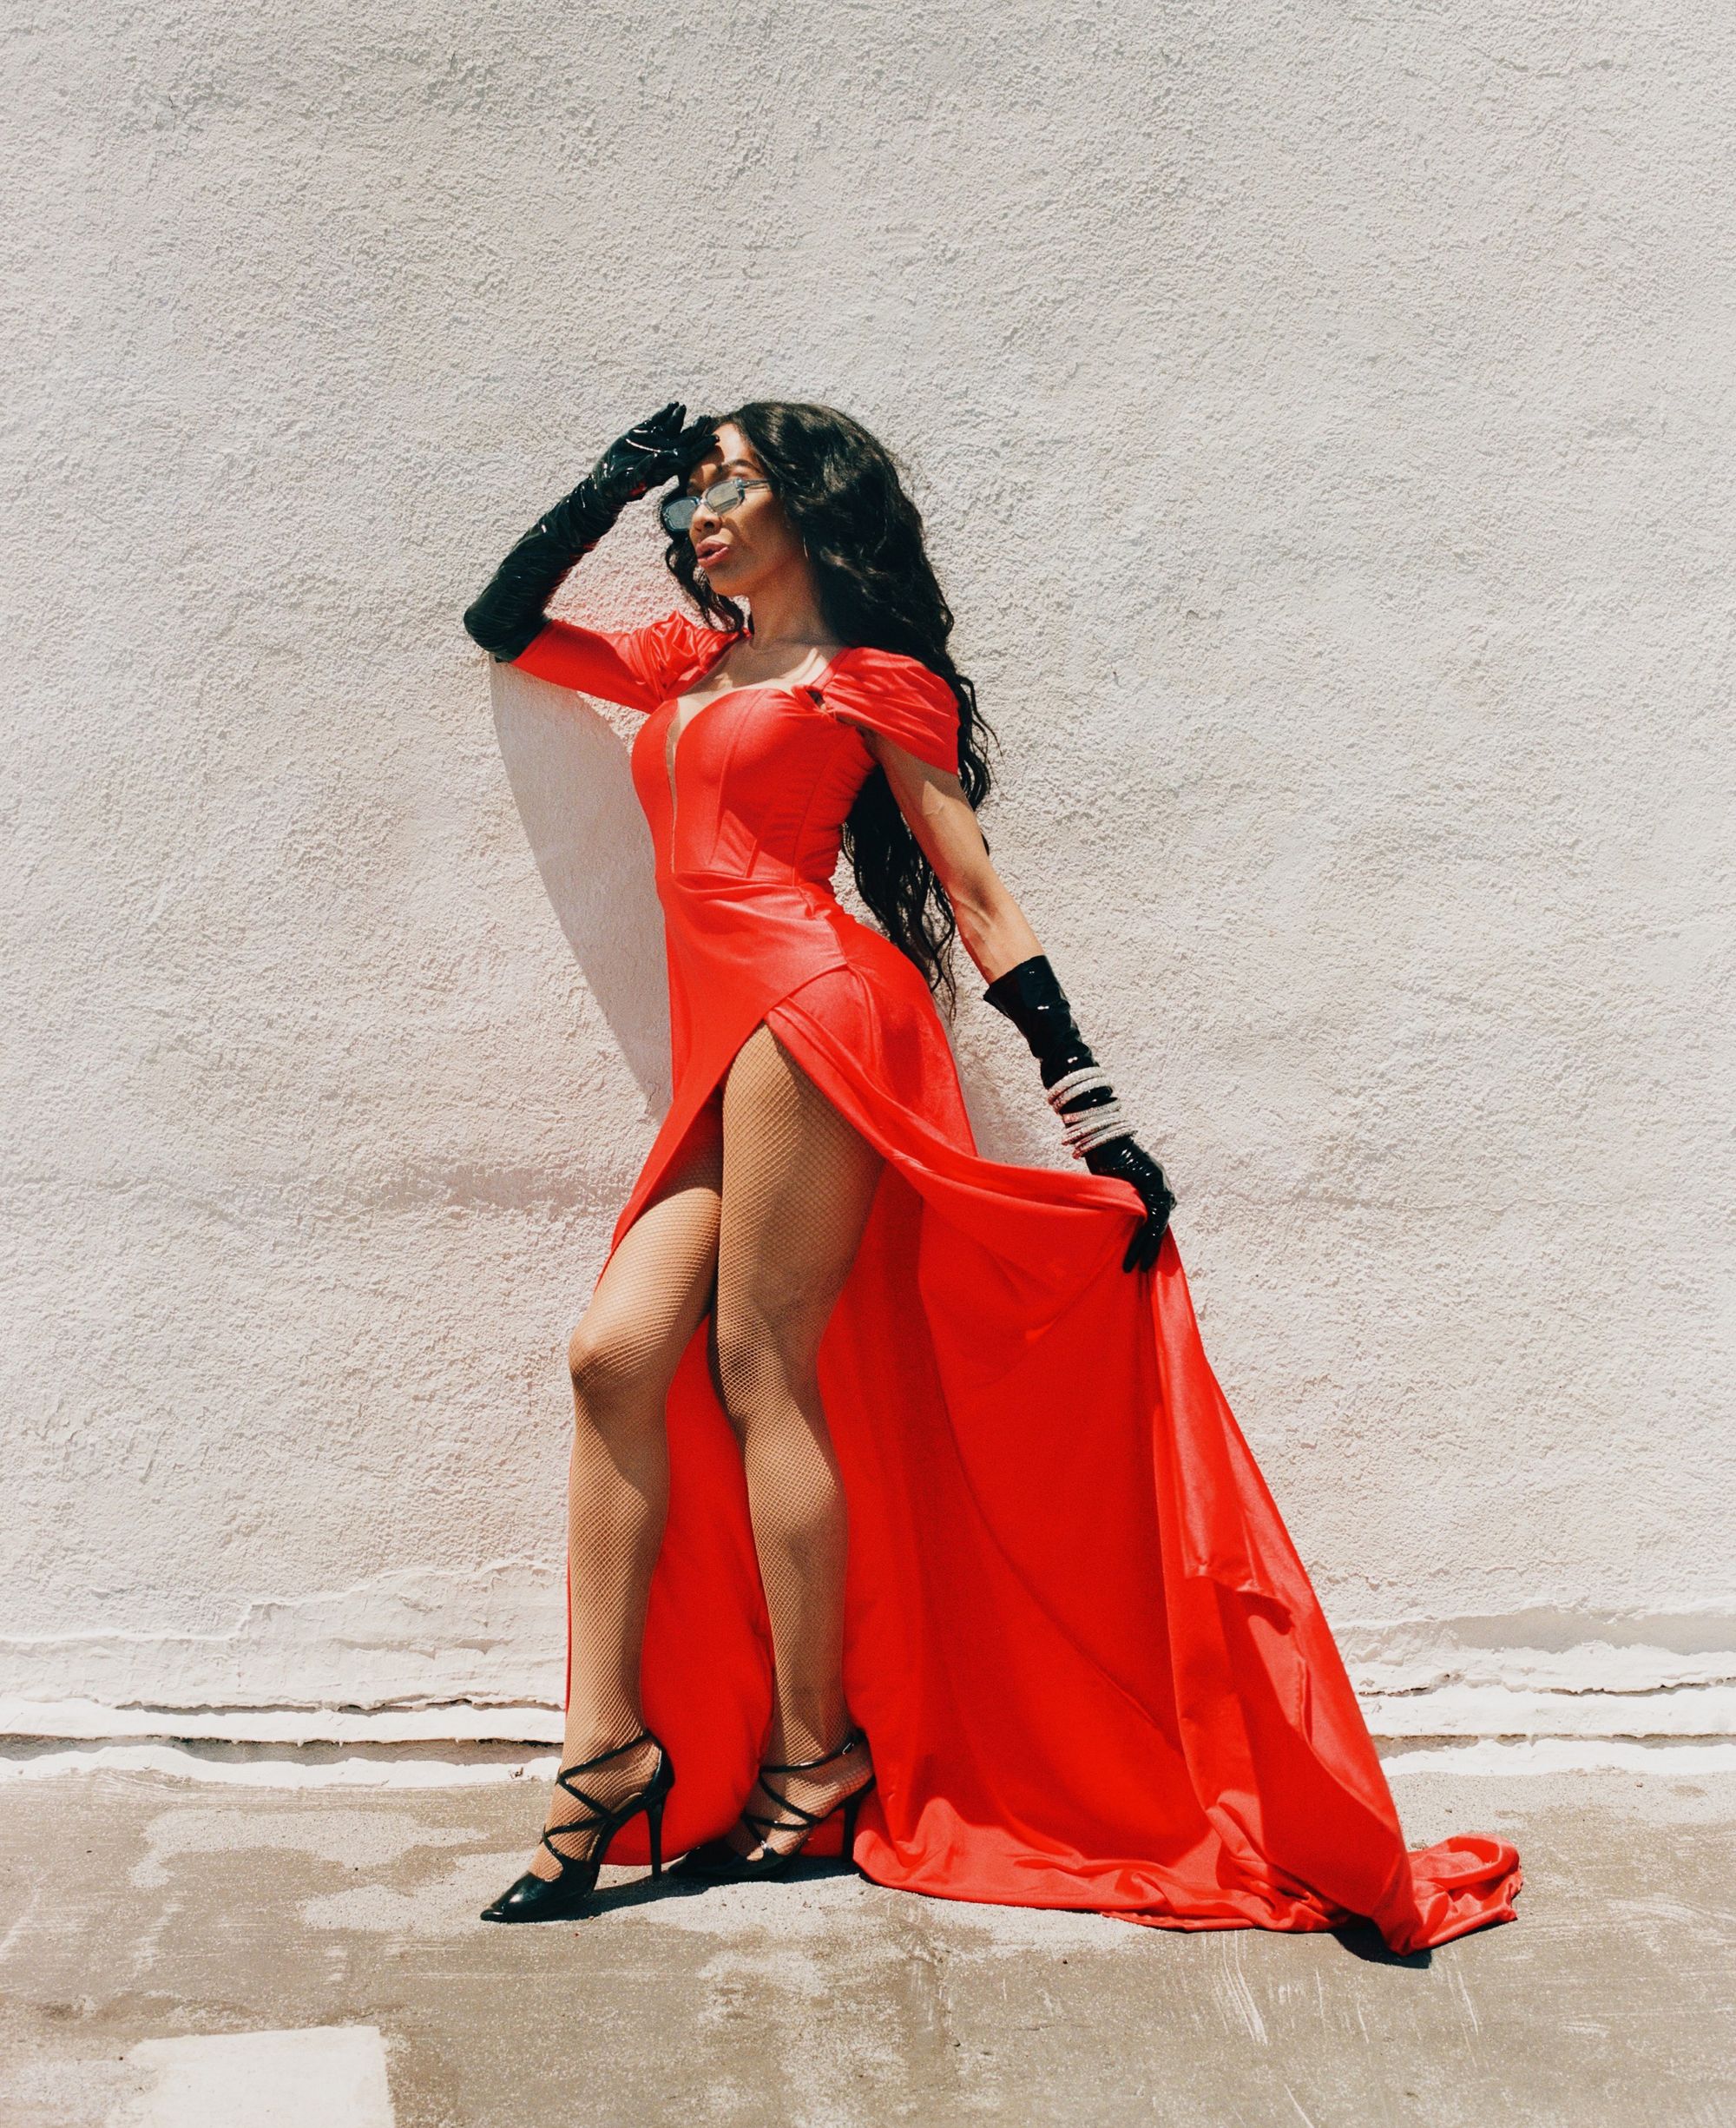 Gia Banks posing in front of white wall wearing red dress (photography by Texas-Isaiah)